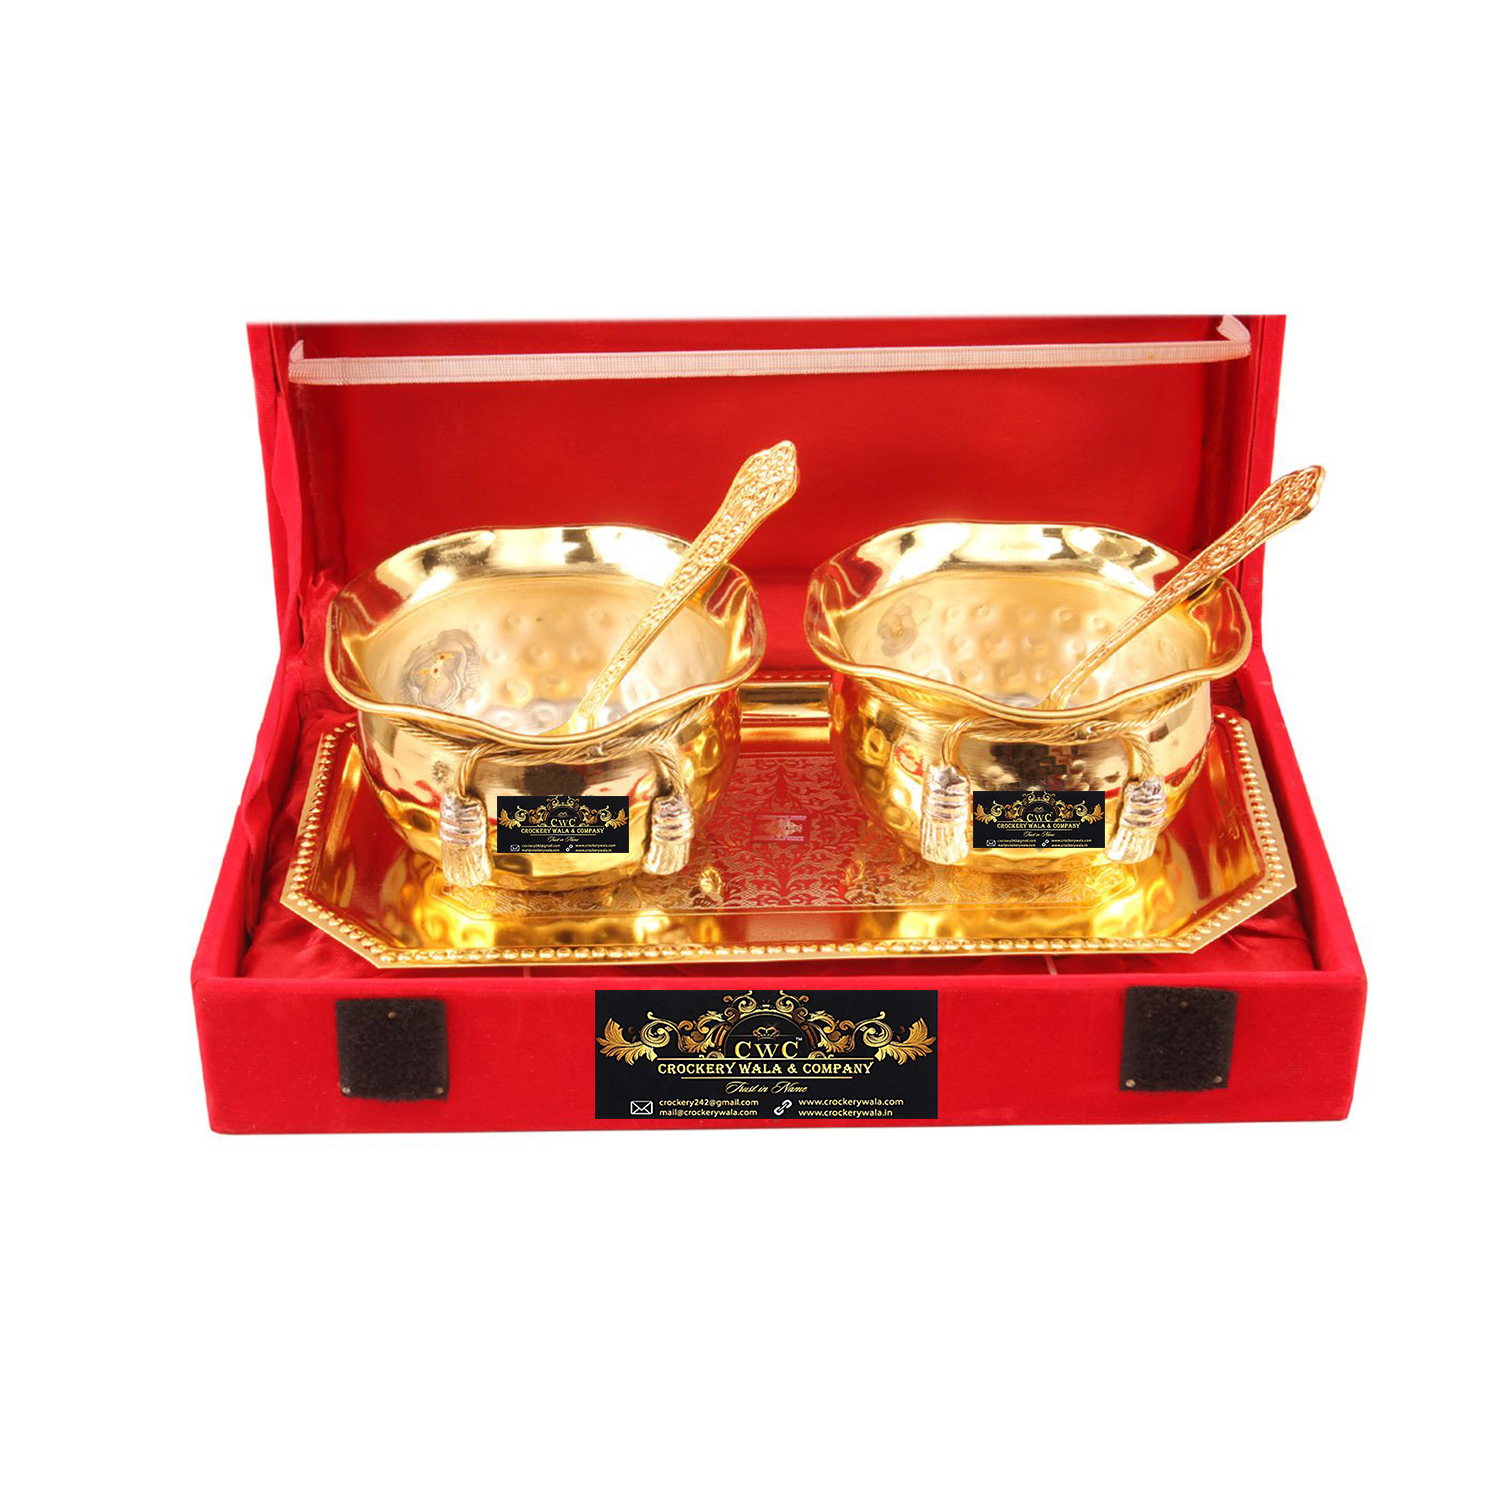 Silver Plated Gold Polish Designer 2 Bowl Set with 2 Spoon & 1 Tray for Serving - CROCKERY WALA AND COMPANY 